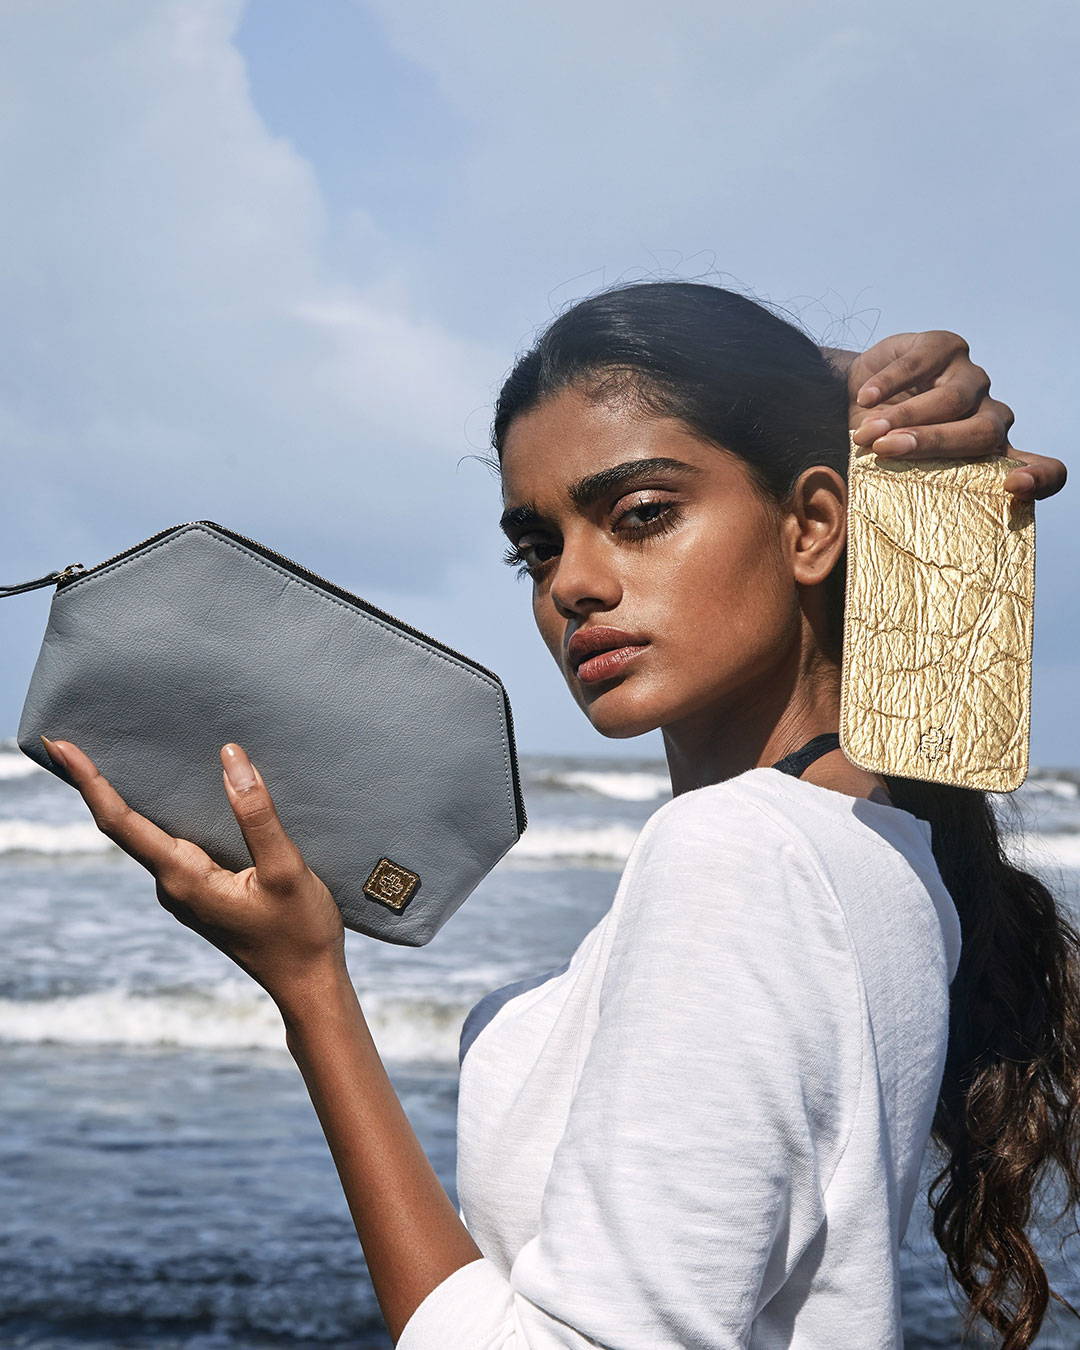 MAYU is a sustainable luxury brand that produces fish leather accessories by upcycling discarded fish skins.